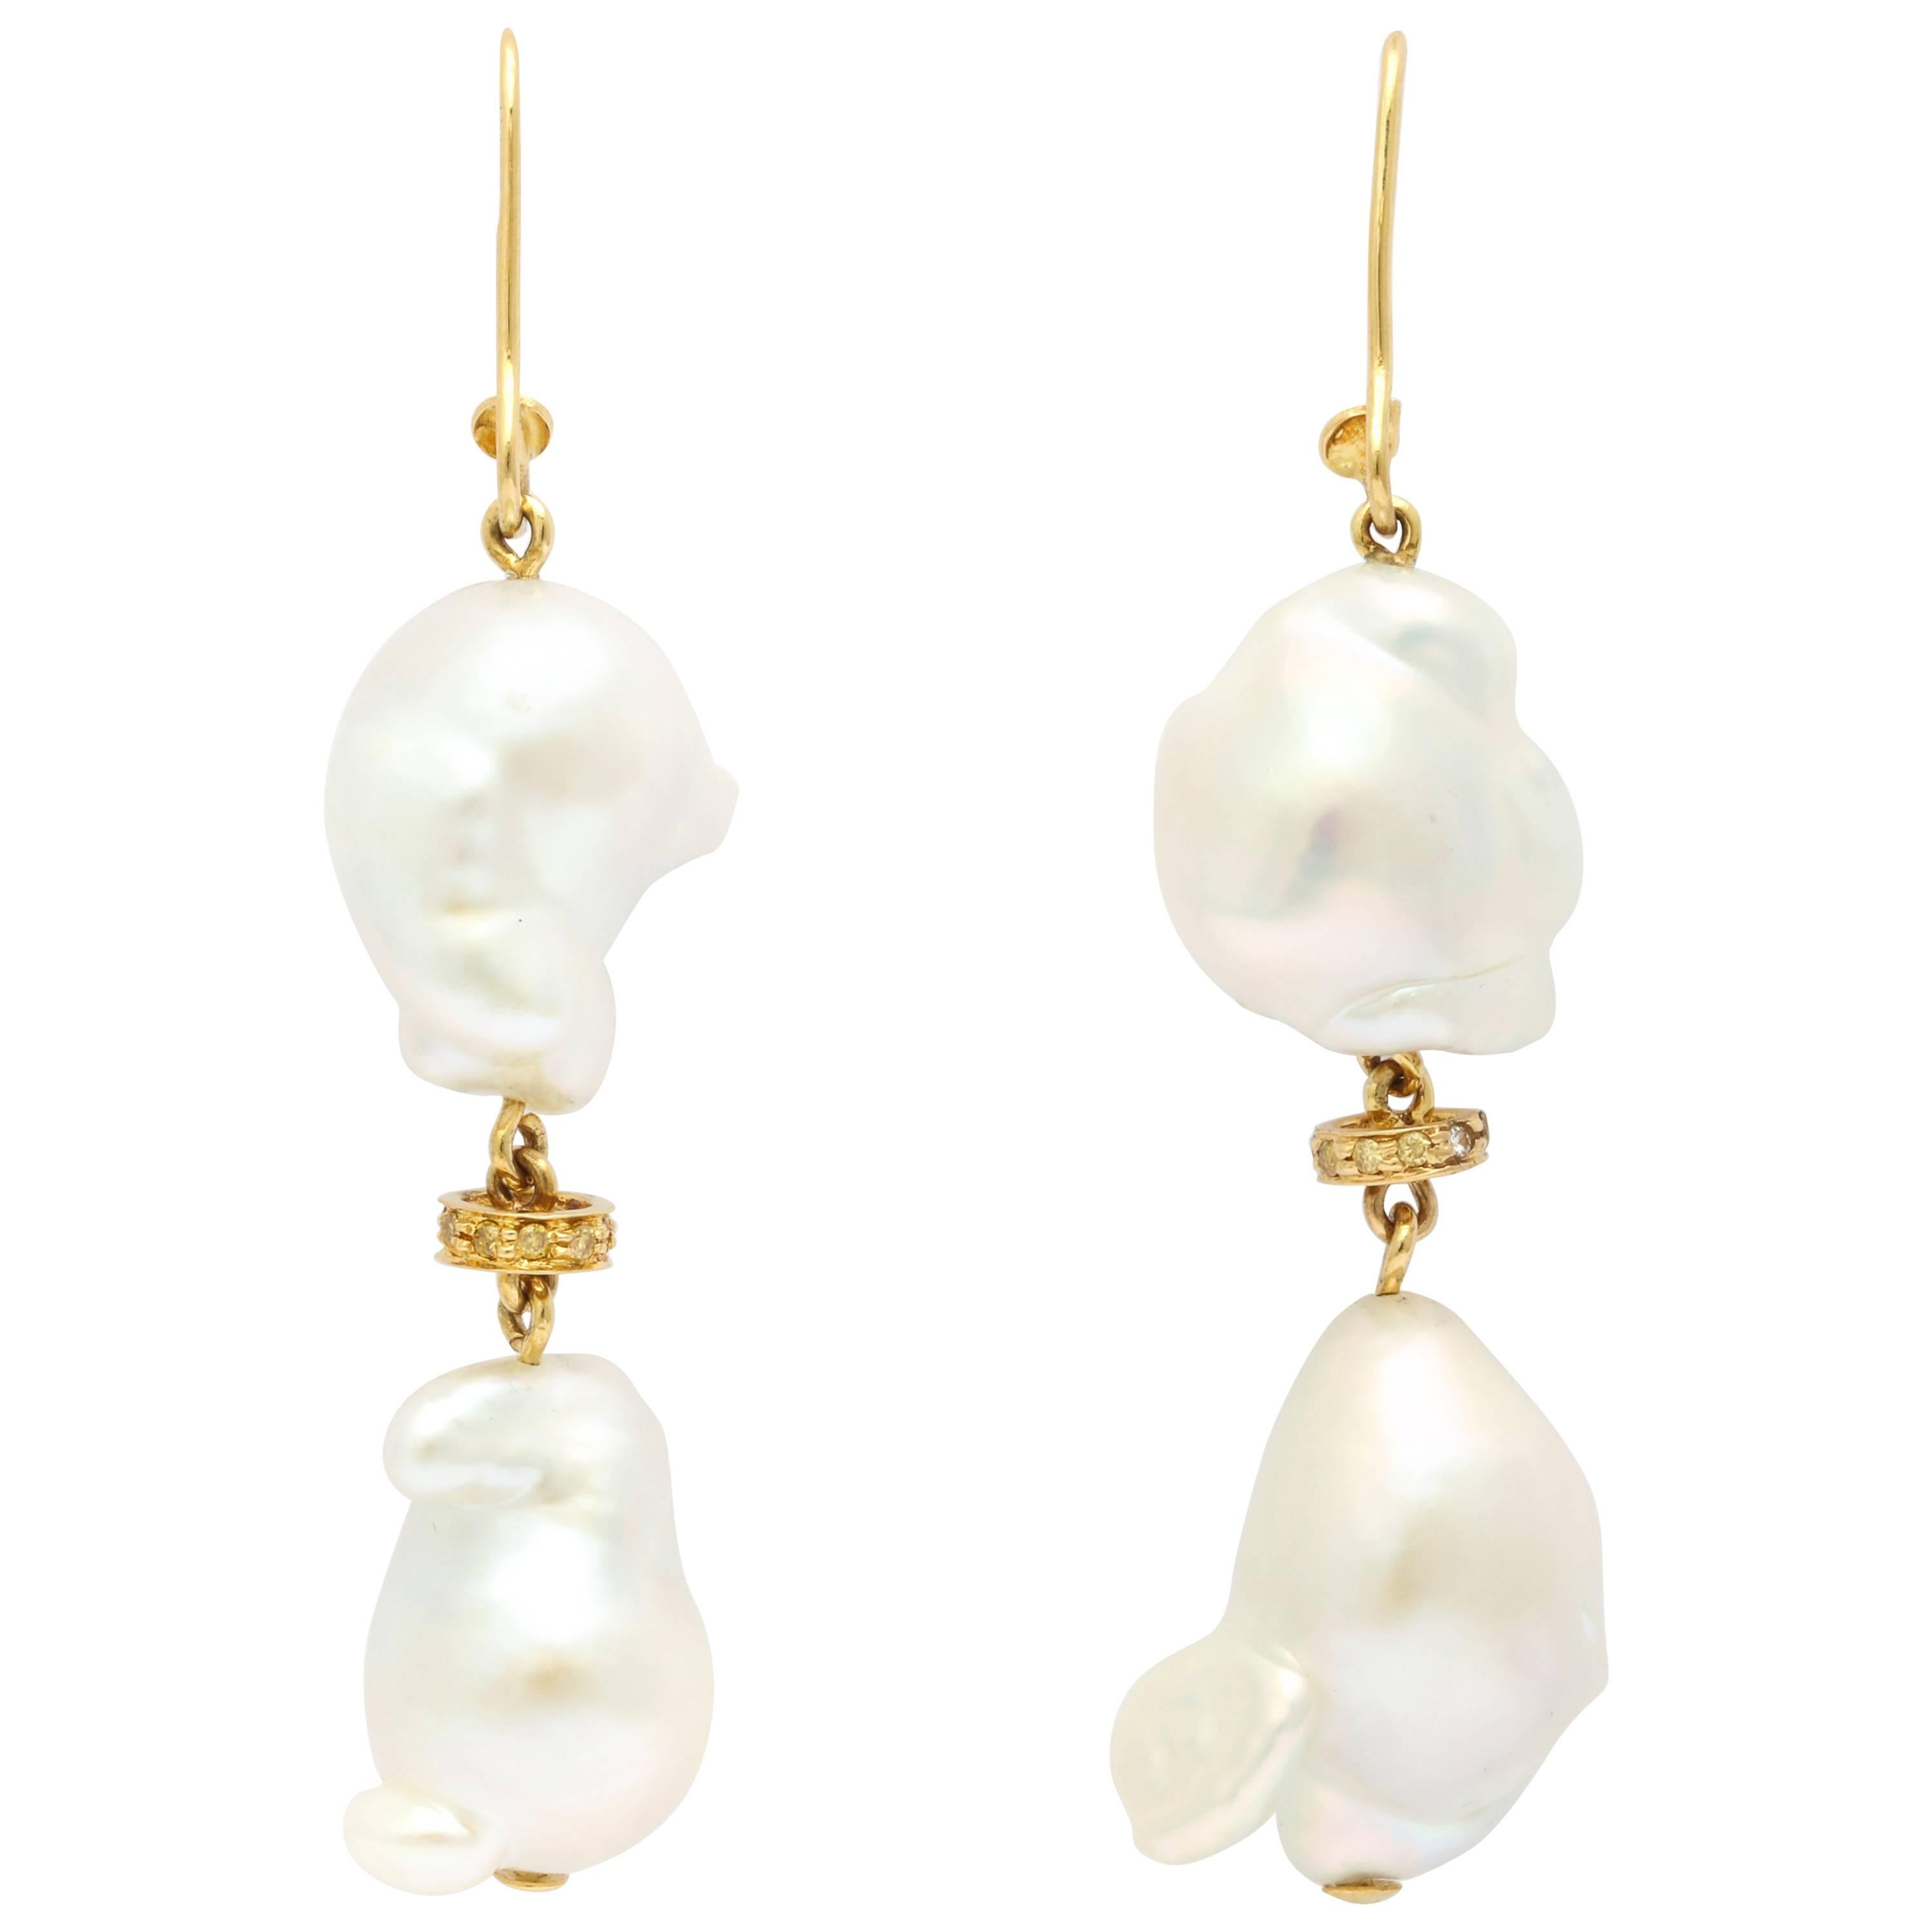 Faraone Mennella Couture Freshwater Pearl Earrings For Sale